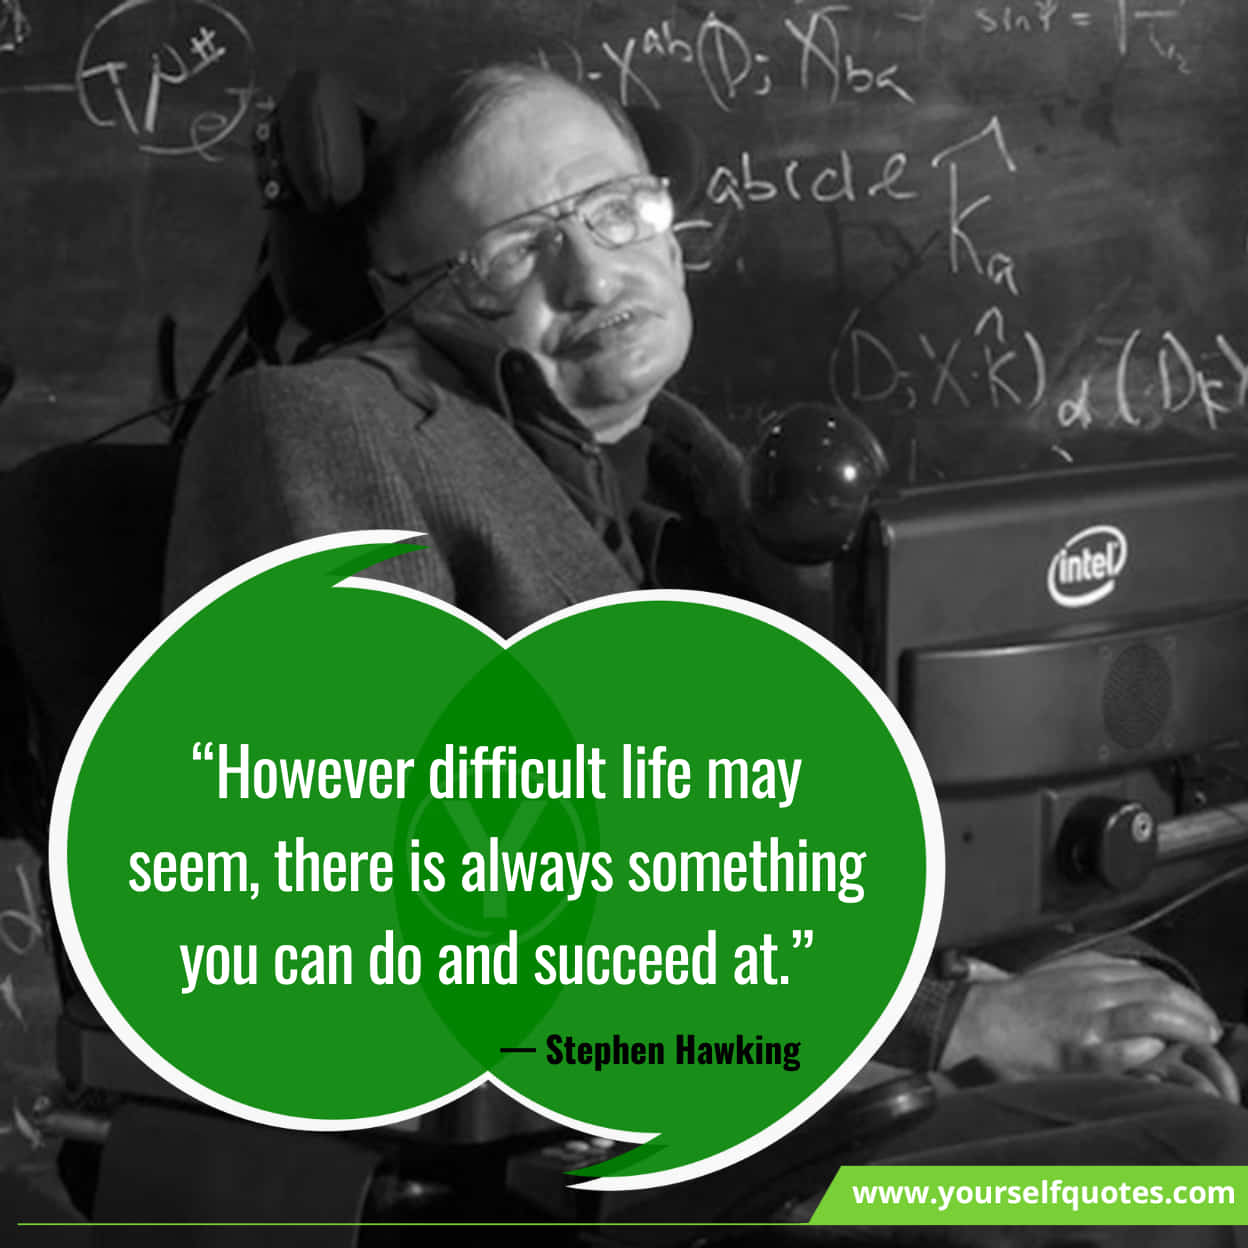 Inspirational Quotes From Best Stephen Hawking